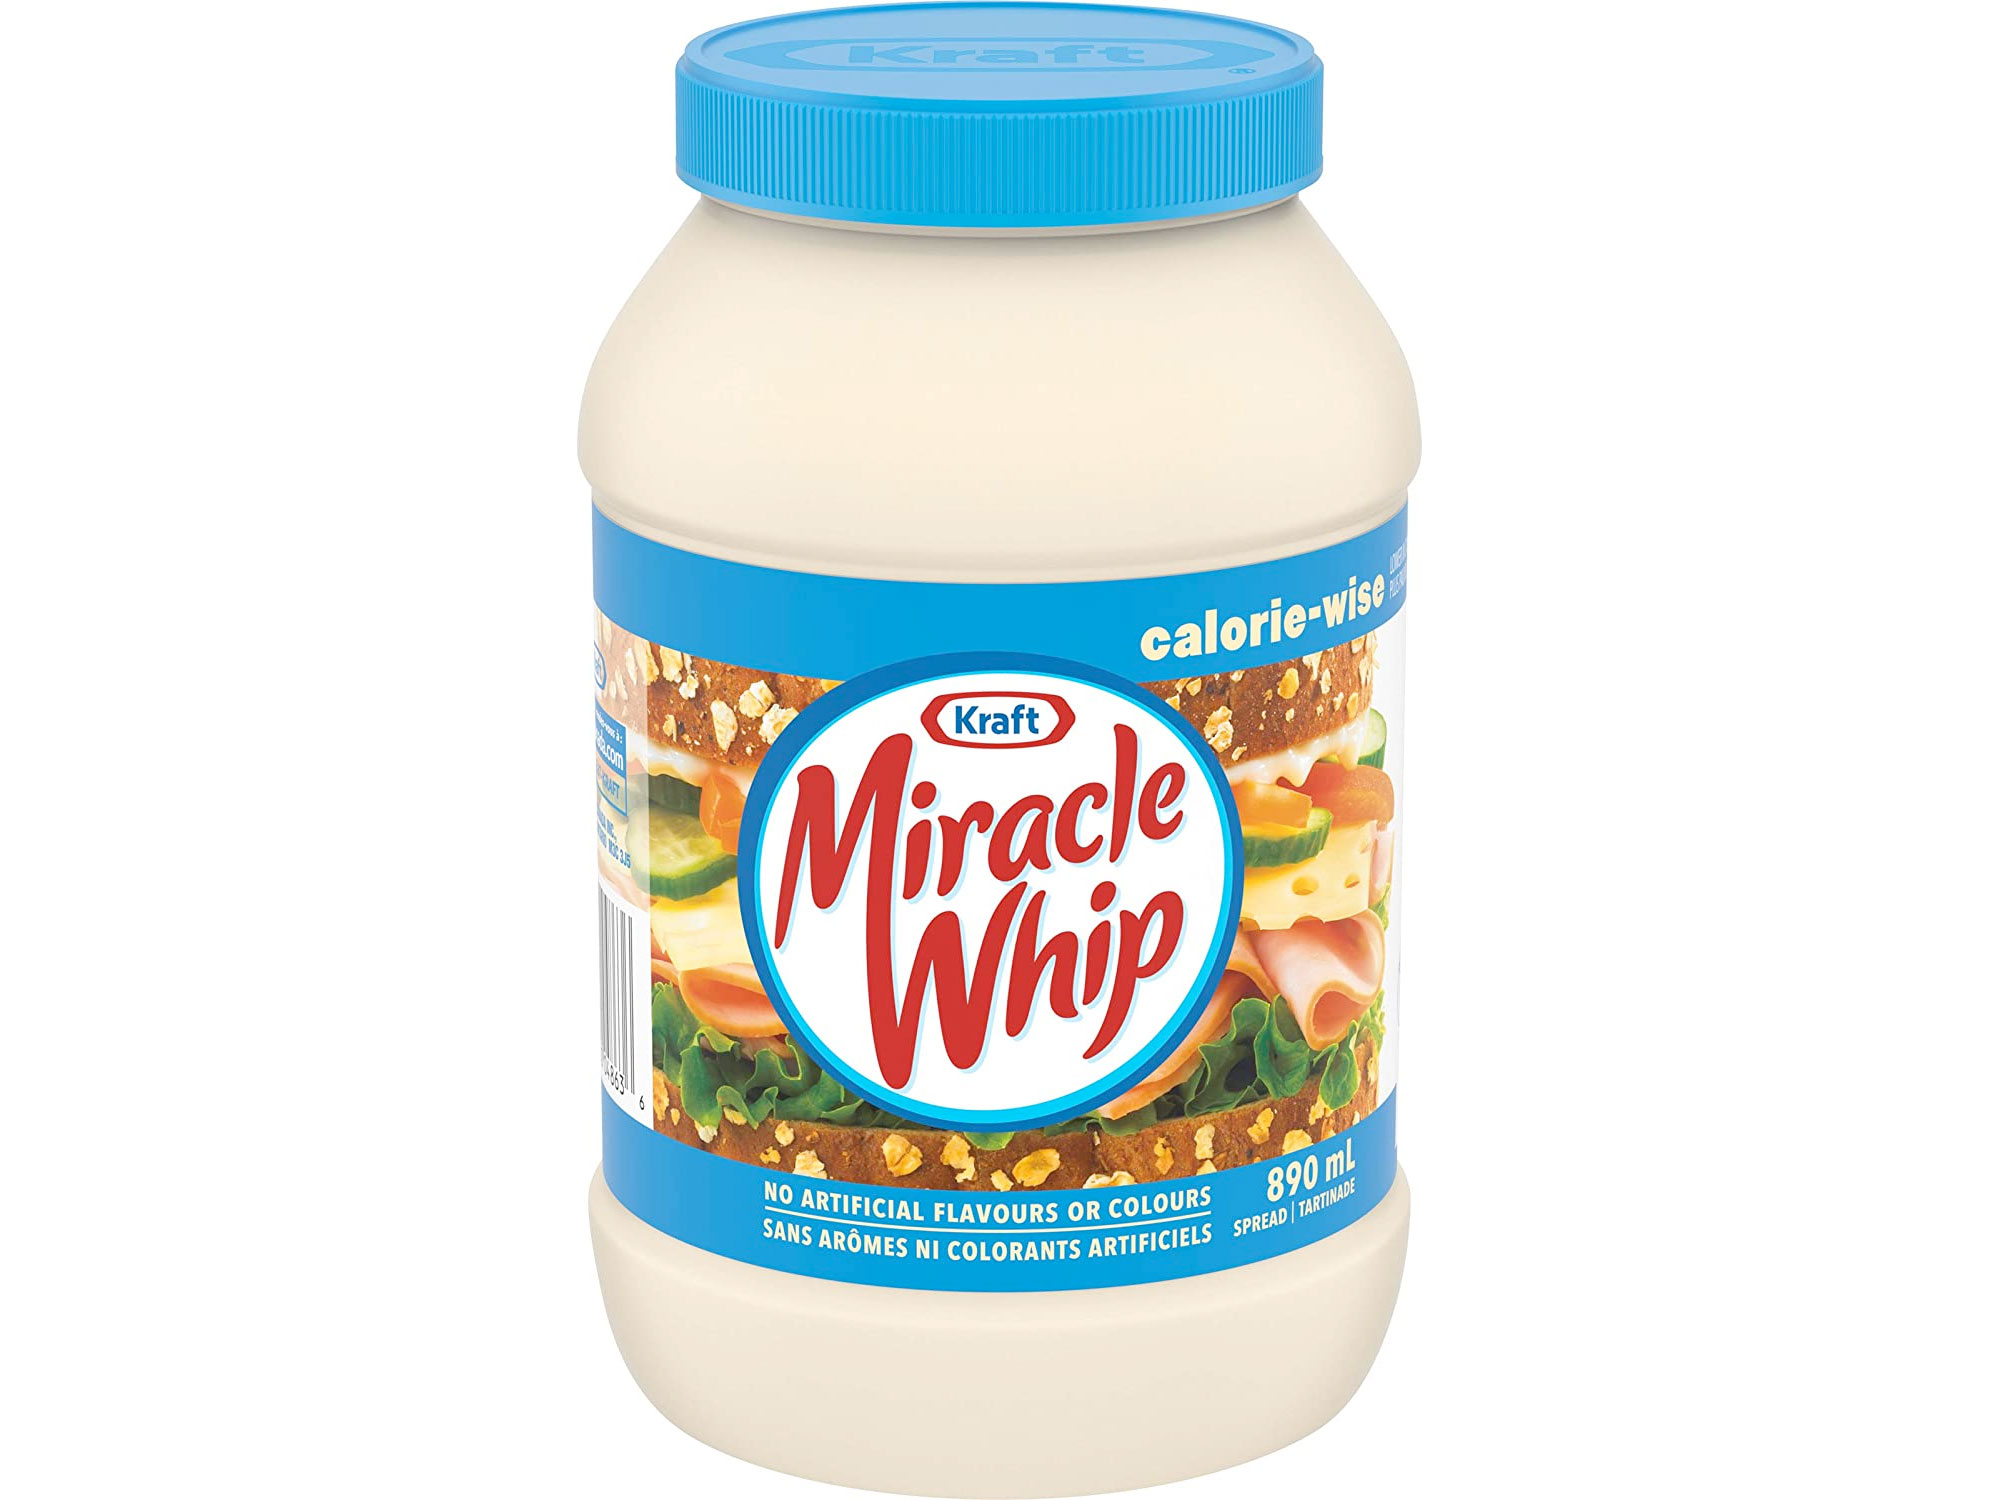 Amazon：Miracle Whip Calorie Wise Dressing (890 ml)只賣$3.99